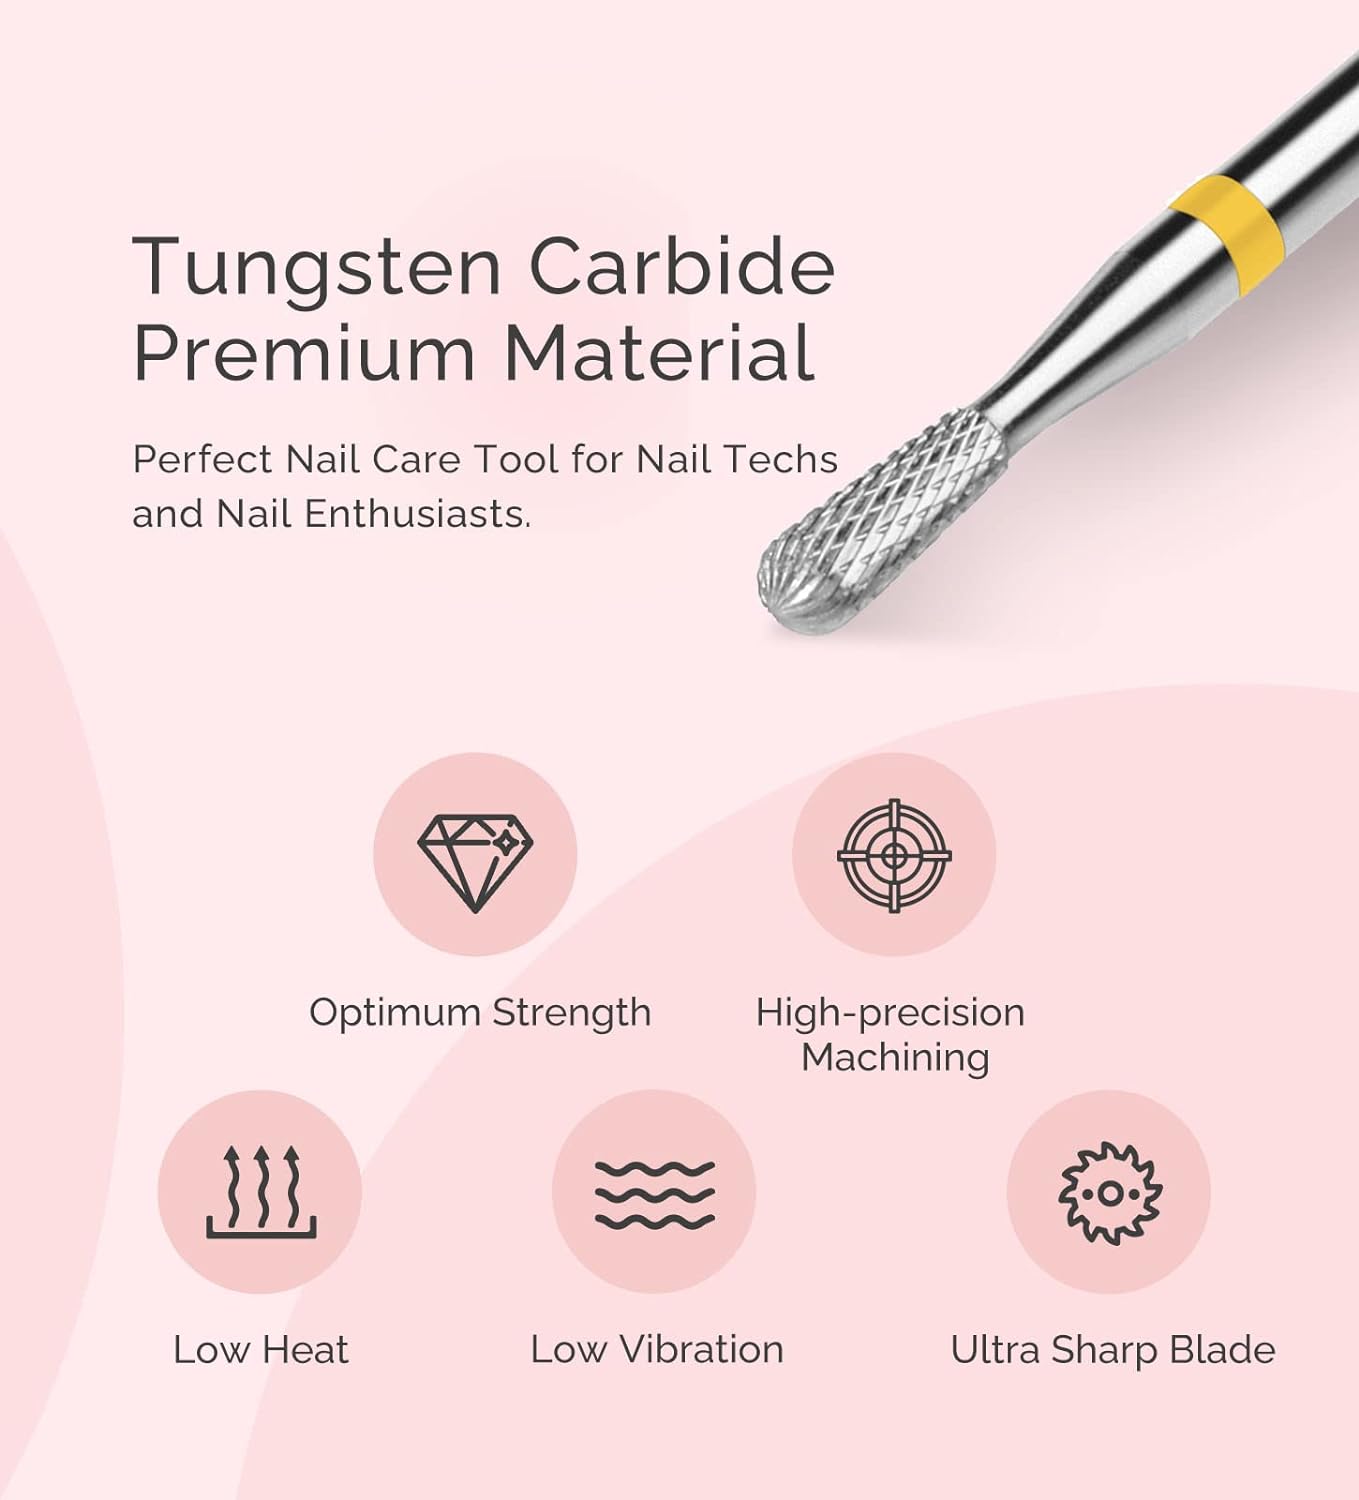 Gentle Bit (Cuticle Clean Nail Drill Bit 3/32'', Professional Safety Carbide Under Nail Cleaner Nail Bit for Cuticle Dead Skin Nail Prepare, Two Way Rotate, Manicure Nail Salon Supply, Pear Shape)